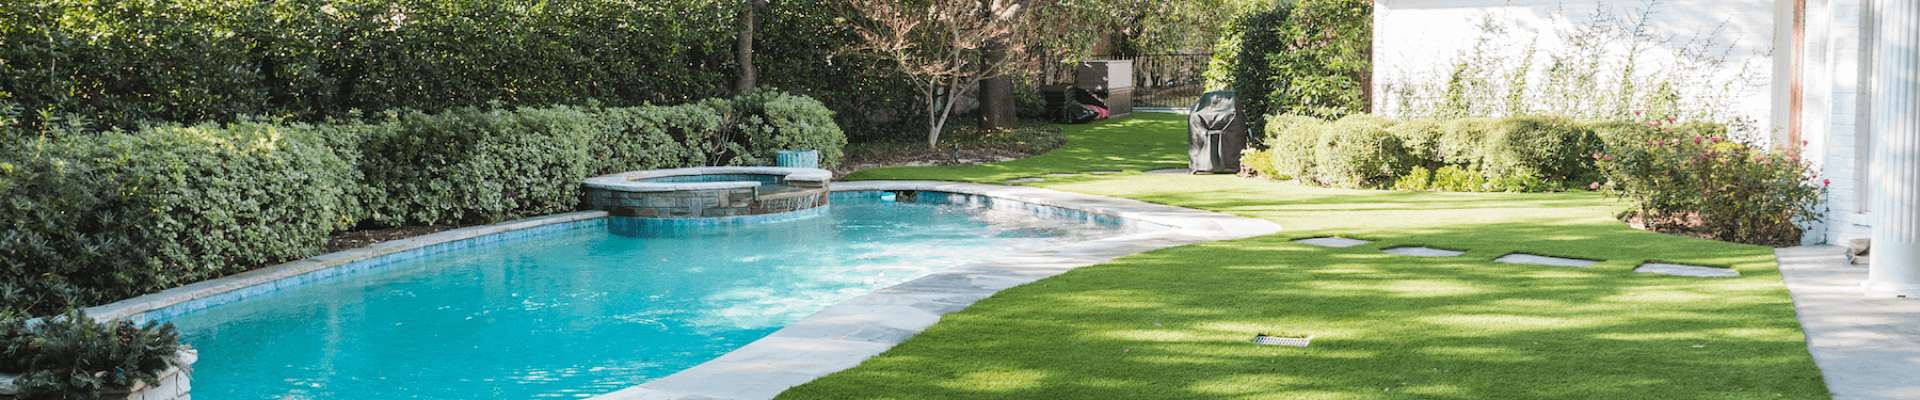 artificial grass in your poolside